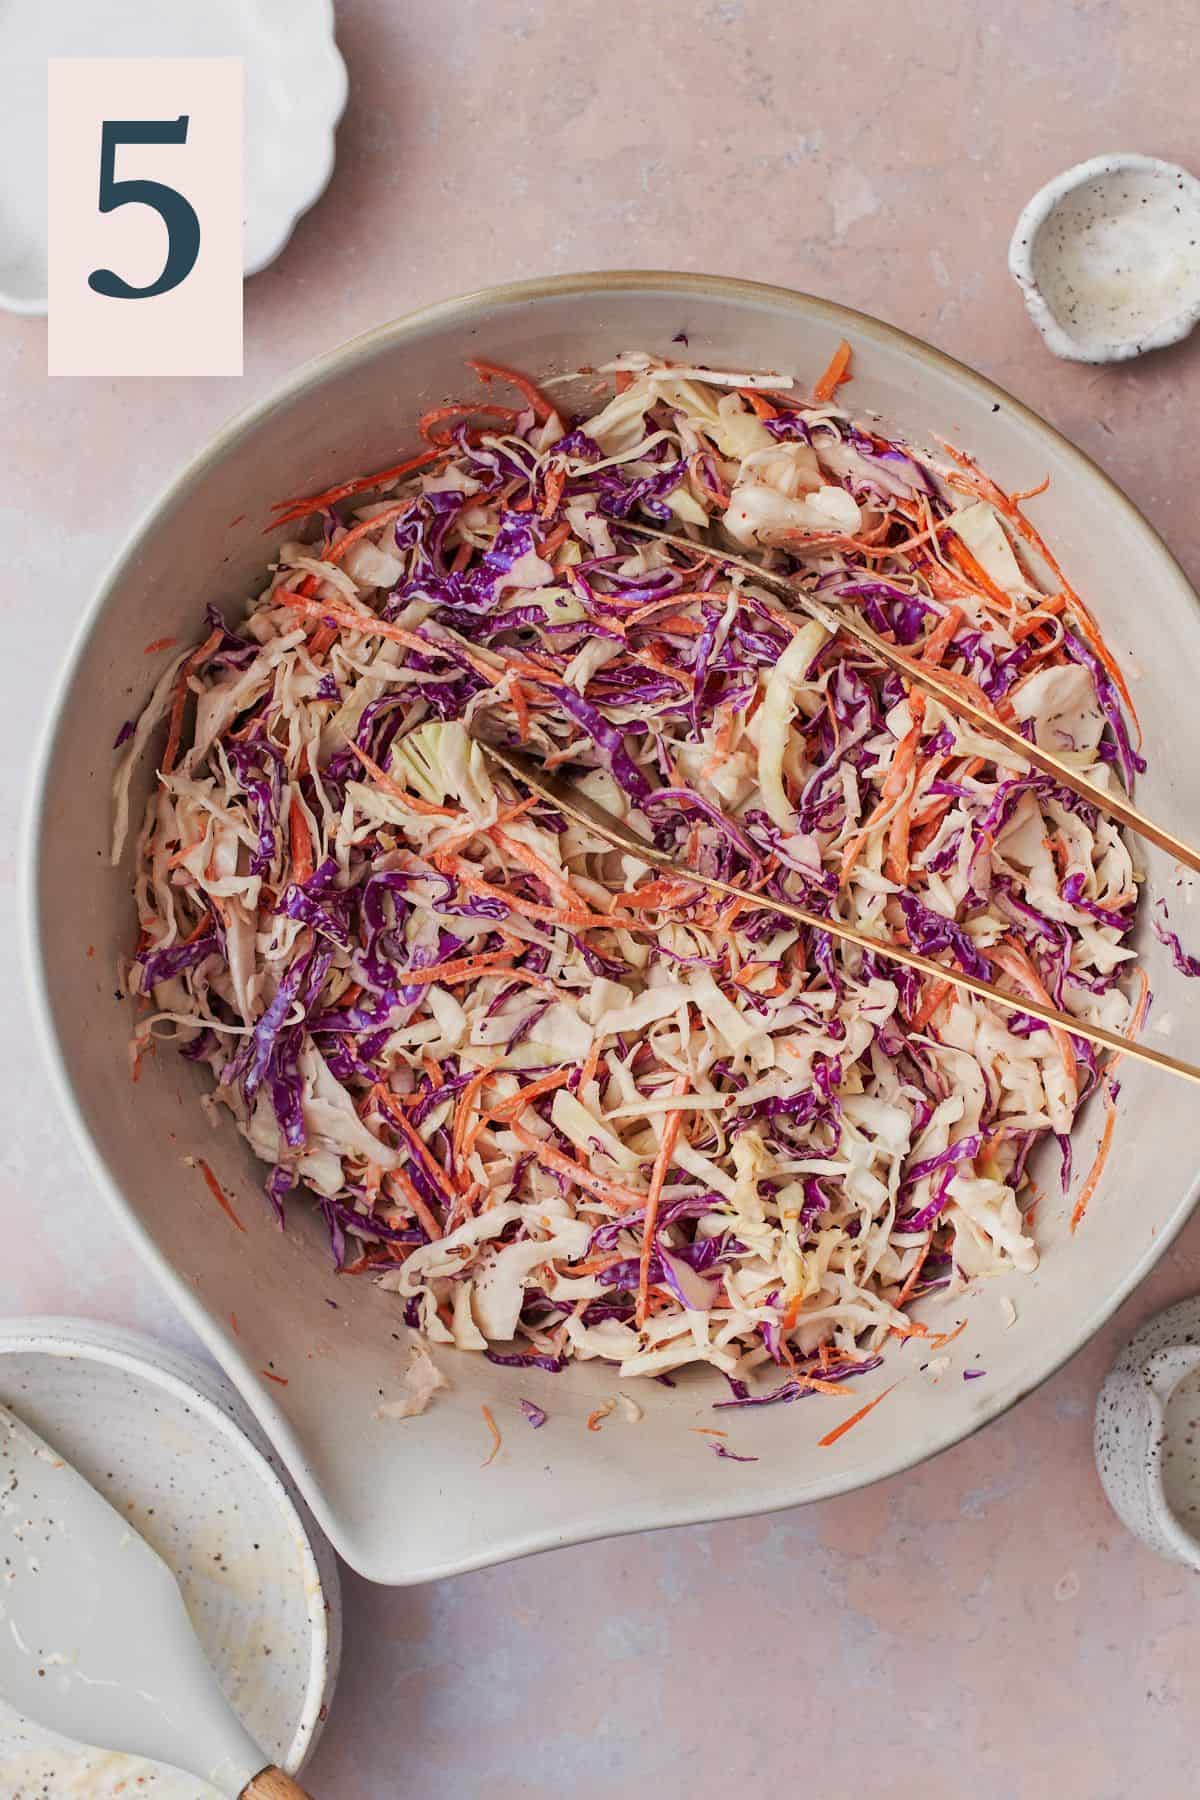 Well mixed keto coleslaw in a large bowl, being ready to serve.